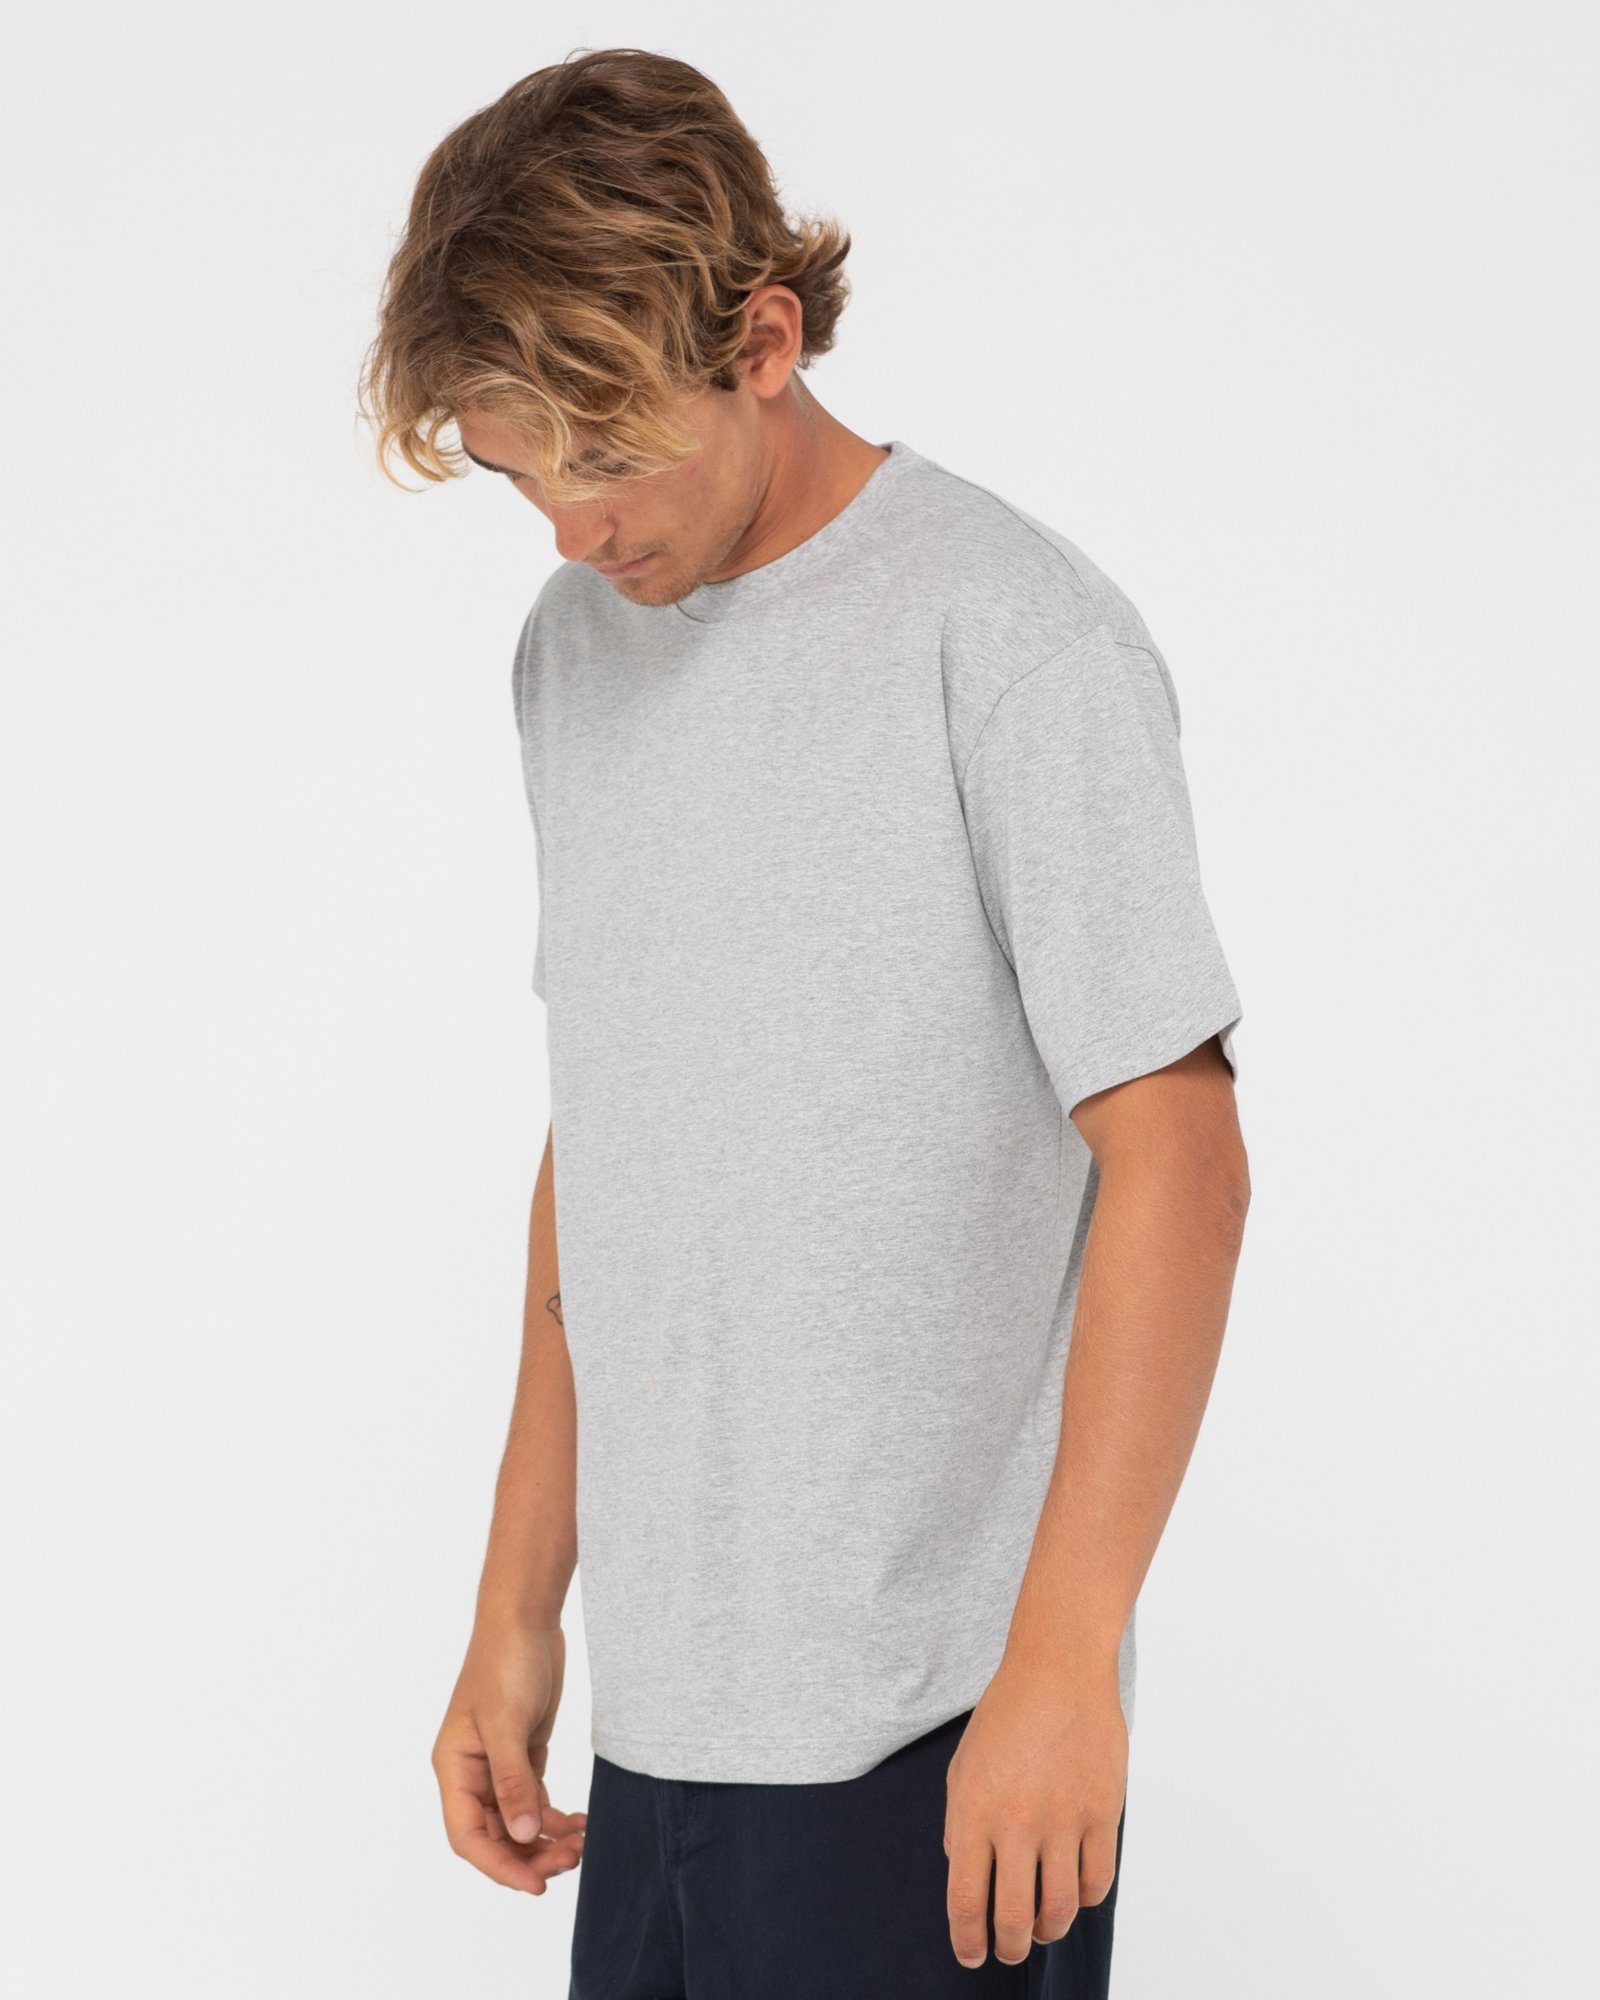 BLANK Marle DELUXE Grey T-Shirt Rusty TEE S/S